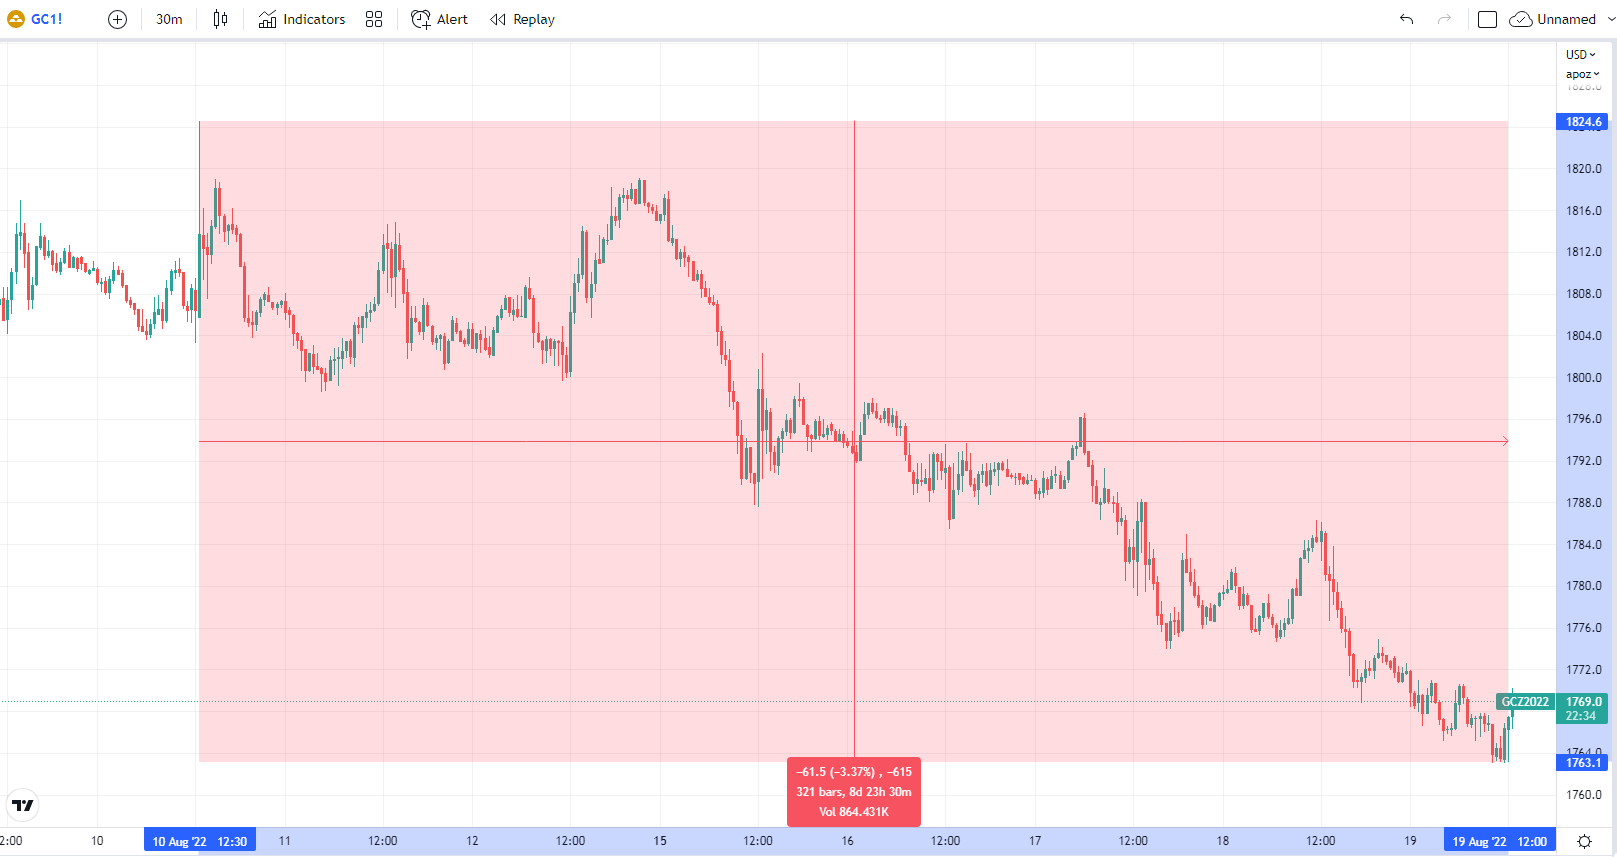 30 minutes chart of GC (Gold Futures), Decline from last week's top. Source: tradingview.com